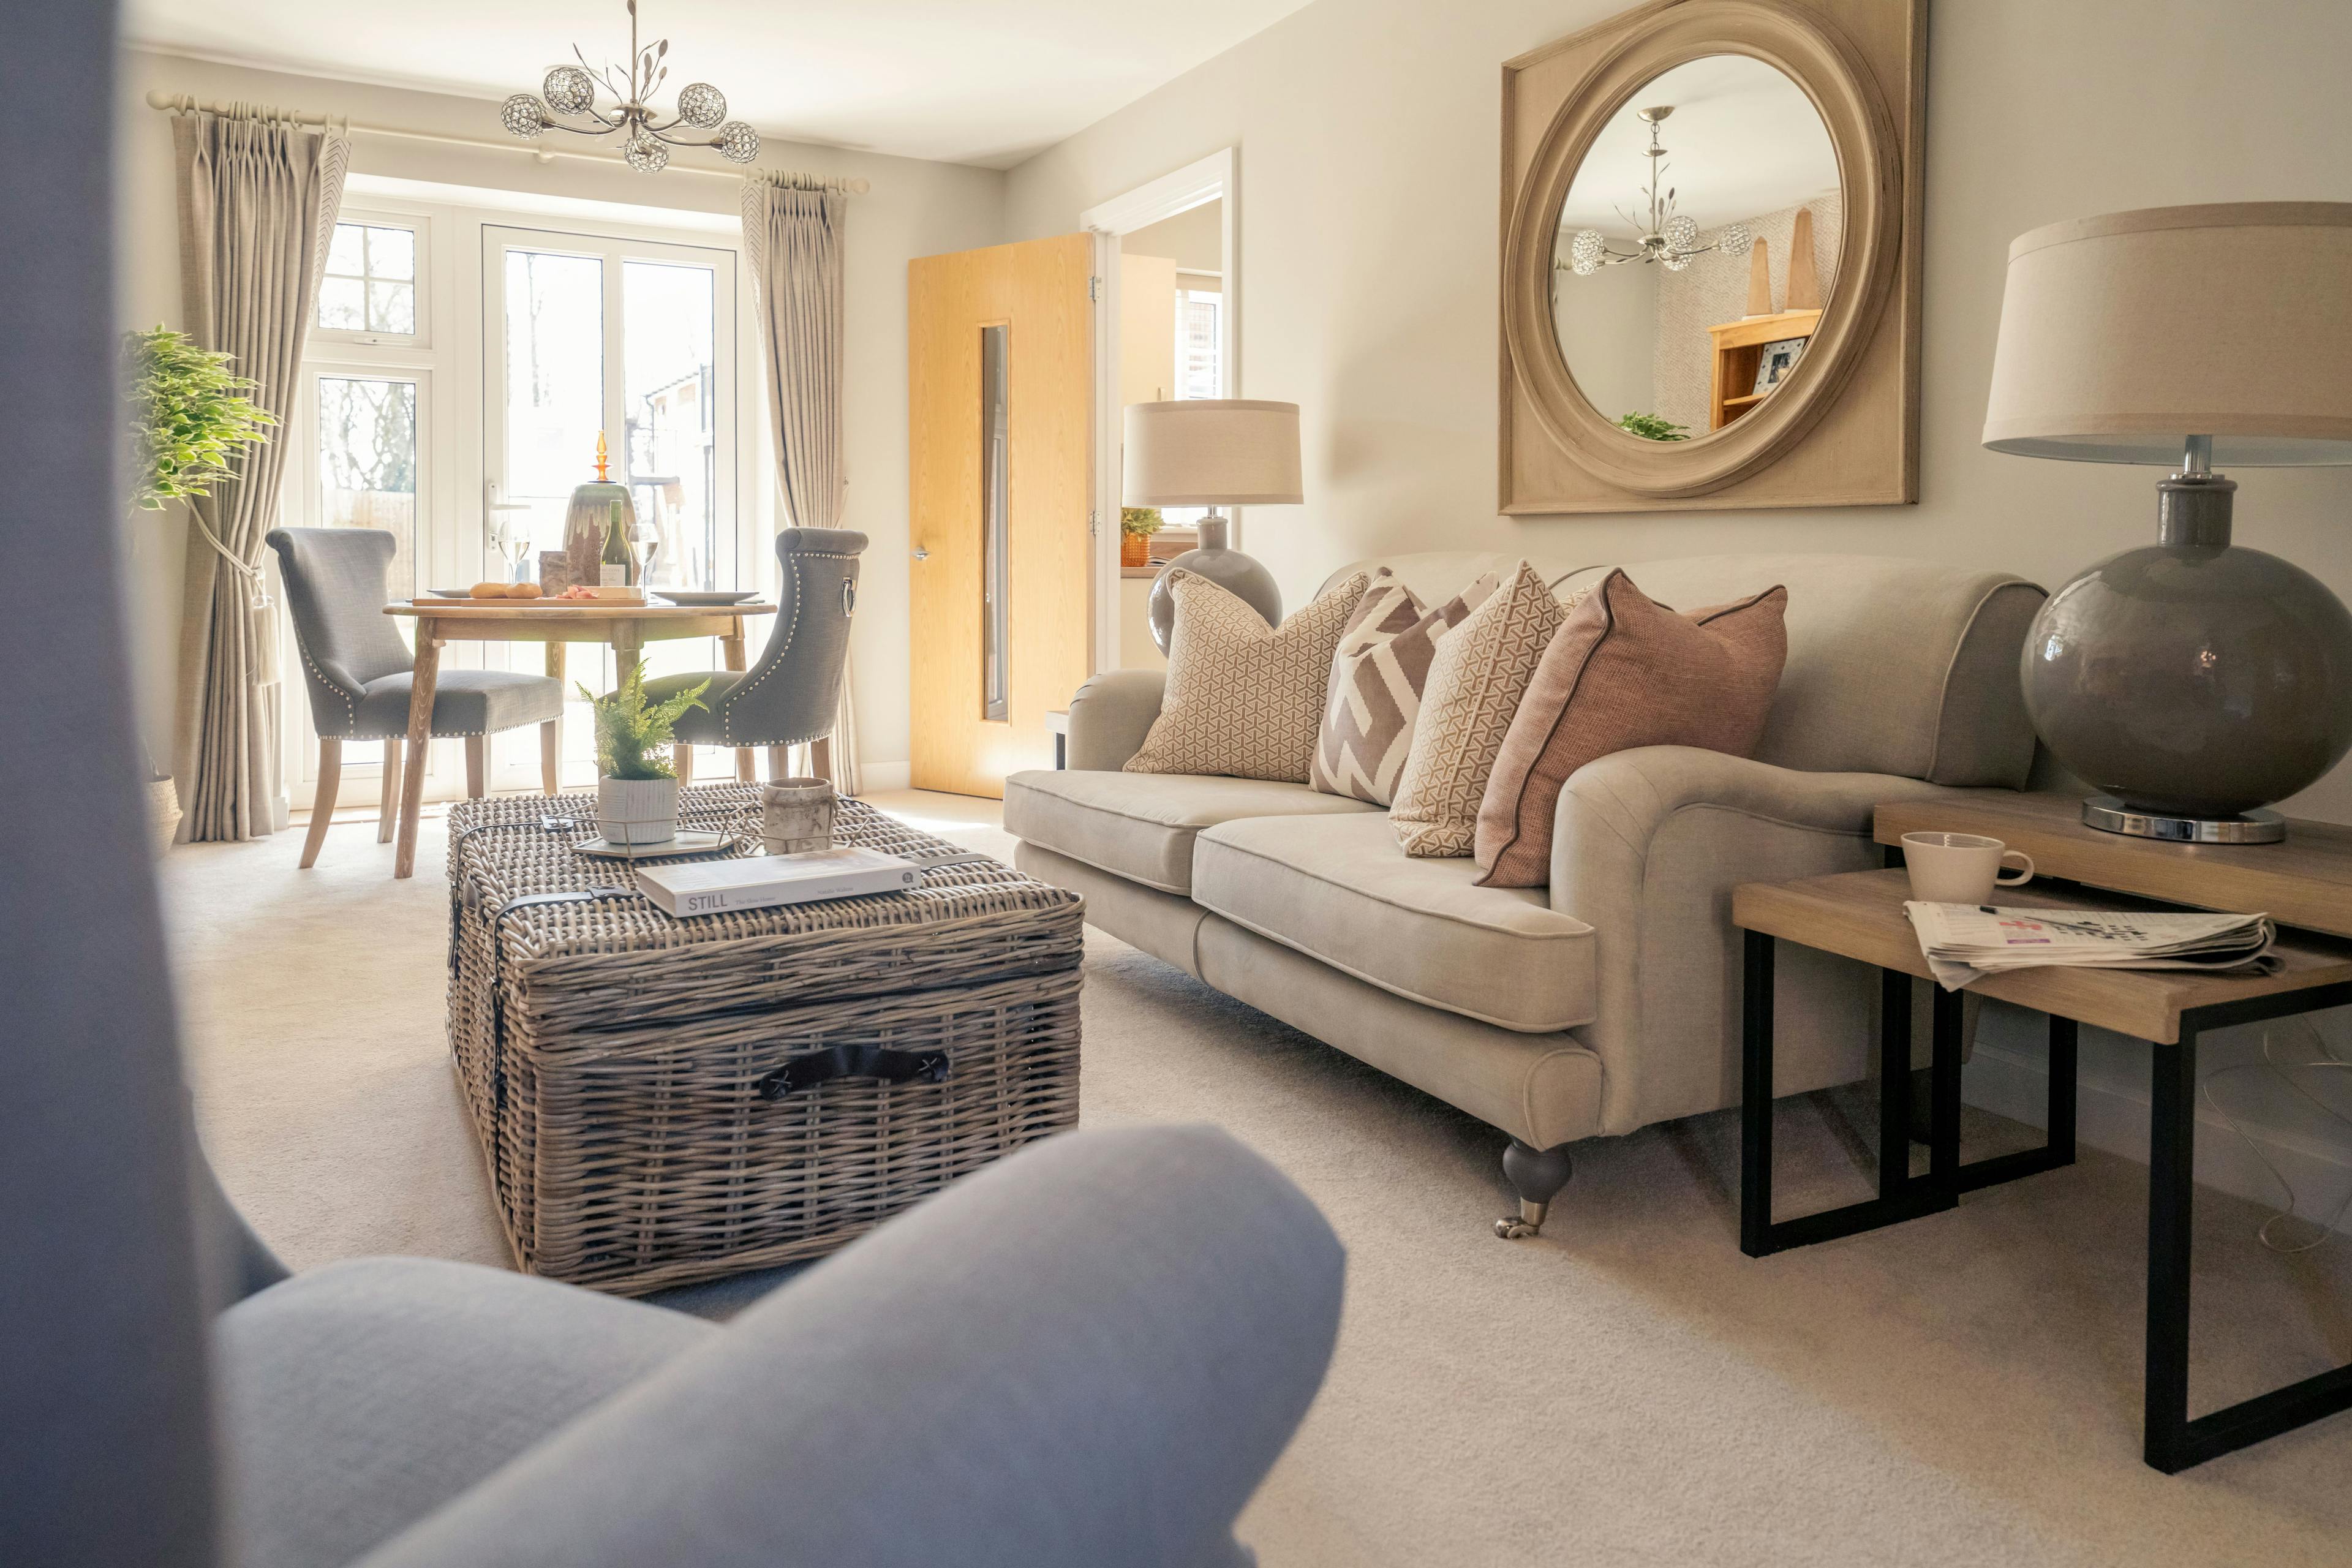 Living Room at Rybeck Court Retirement Development in Pickering, Ryedale